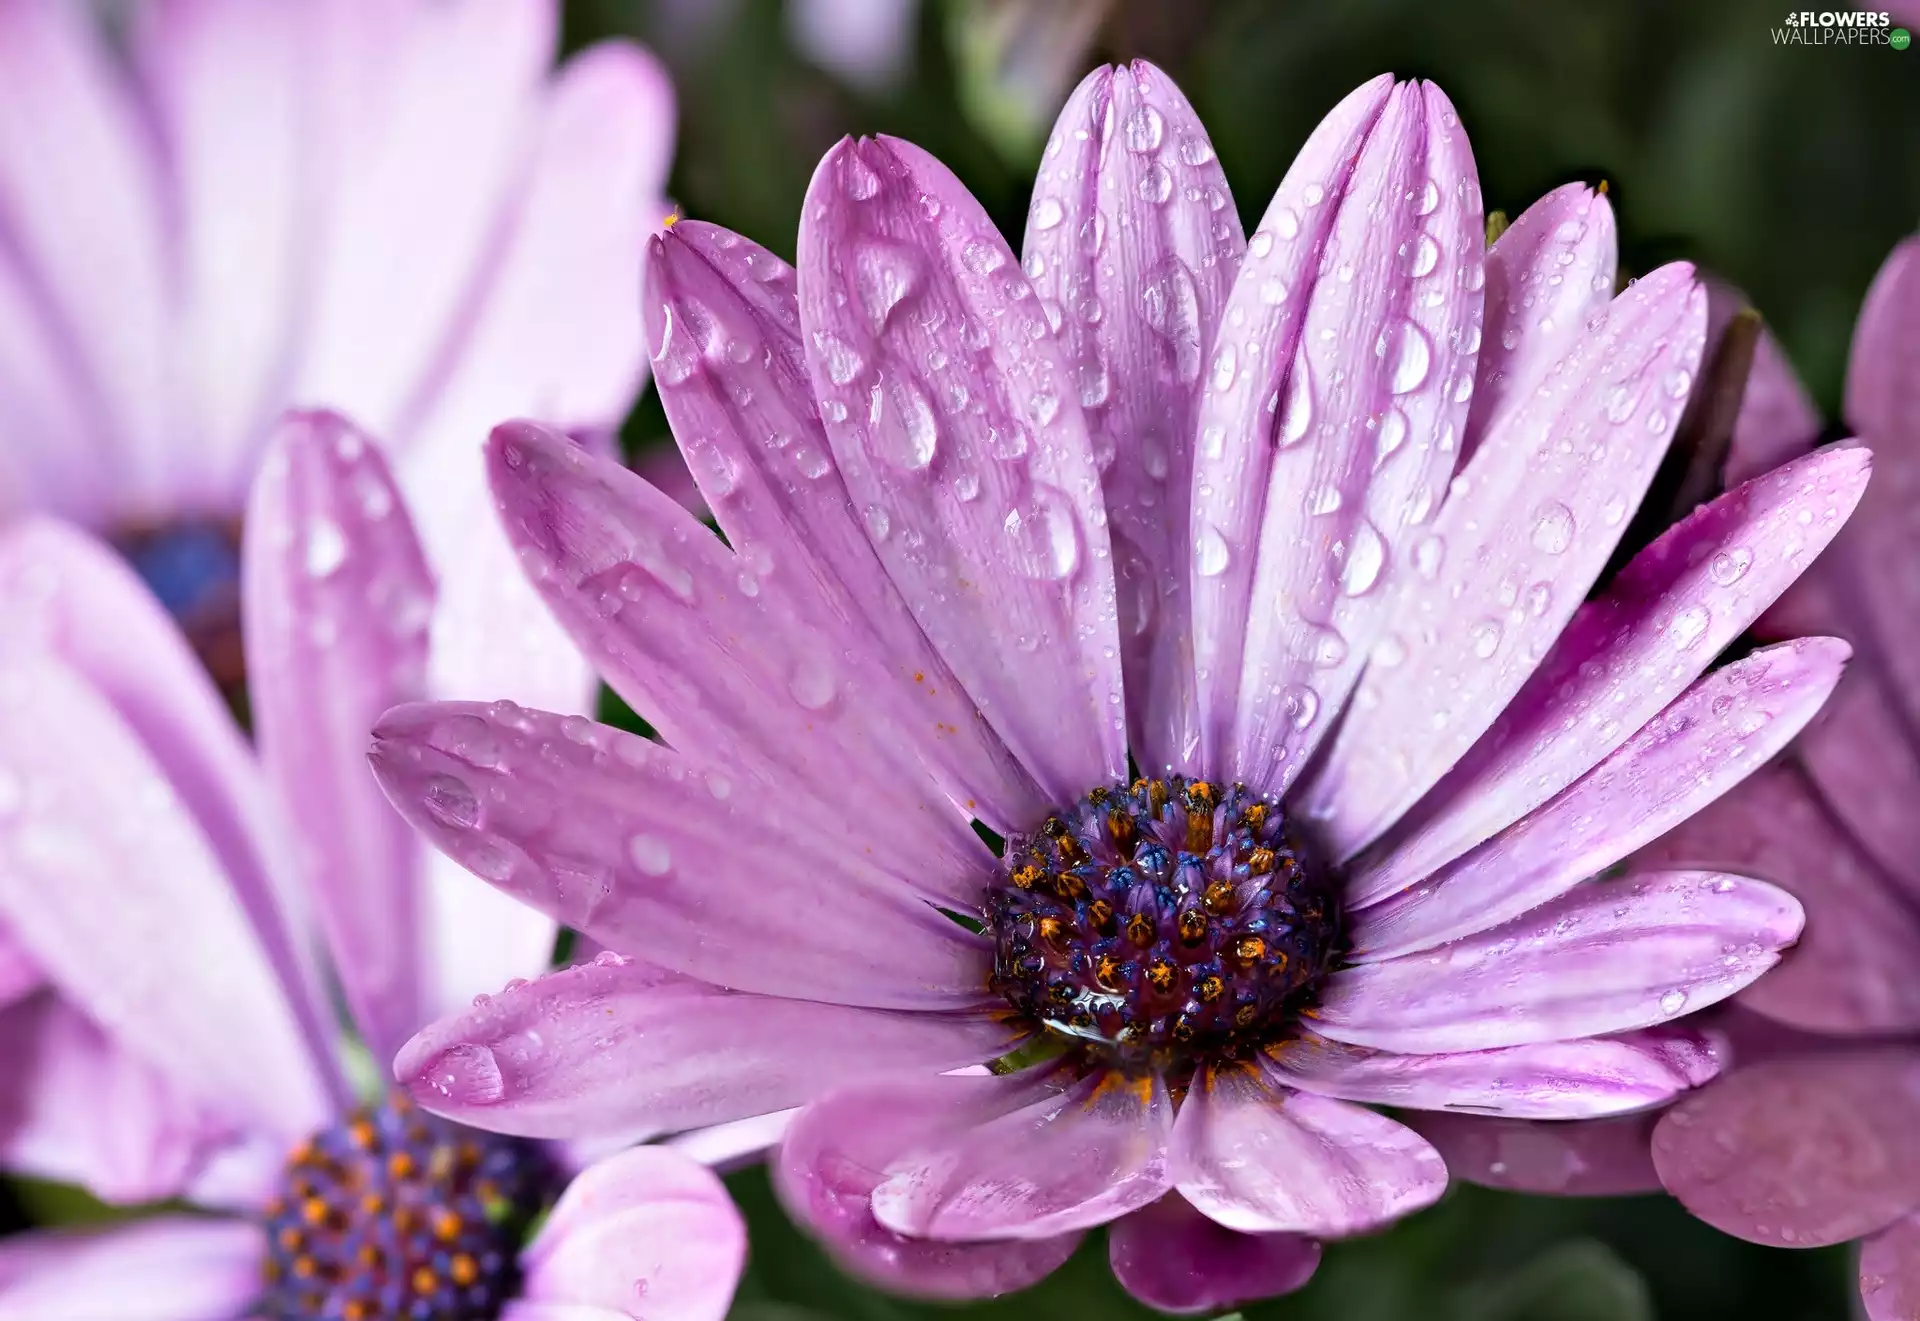 Violet, African, drops, daisy